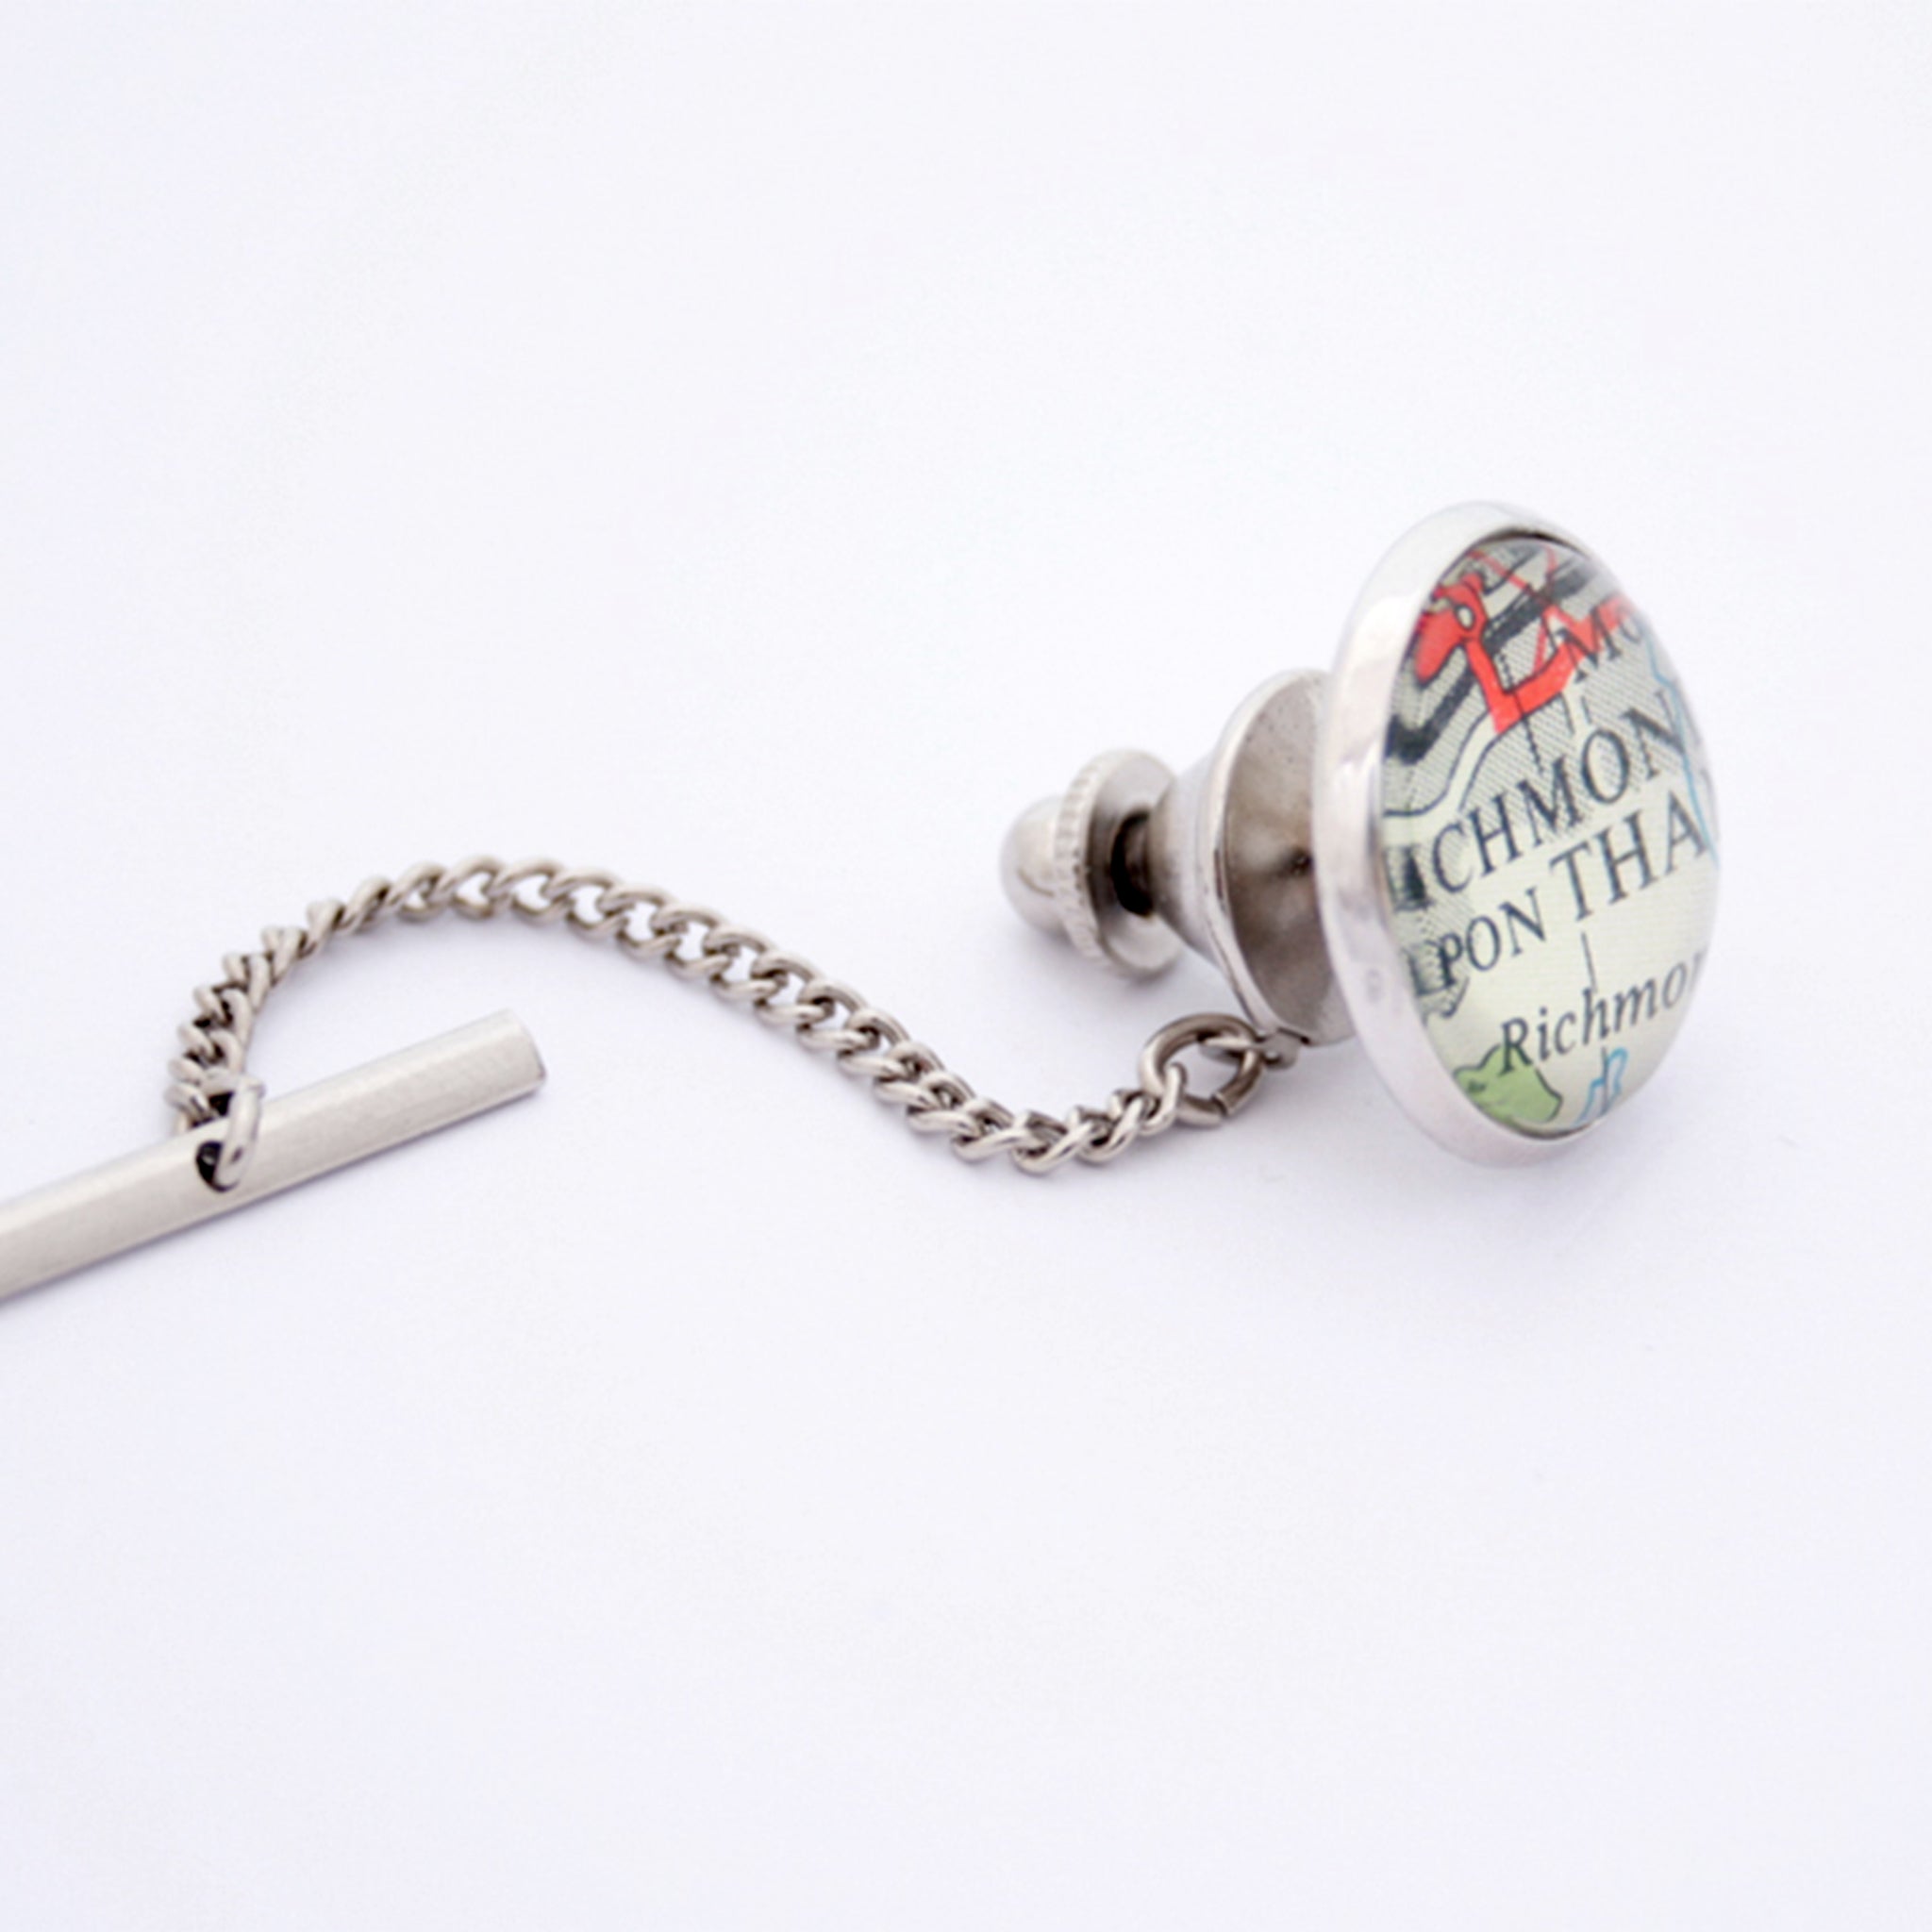 Personalised Tie Tack in silver colour featuring parts of London